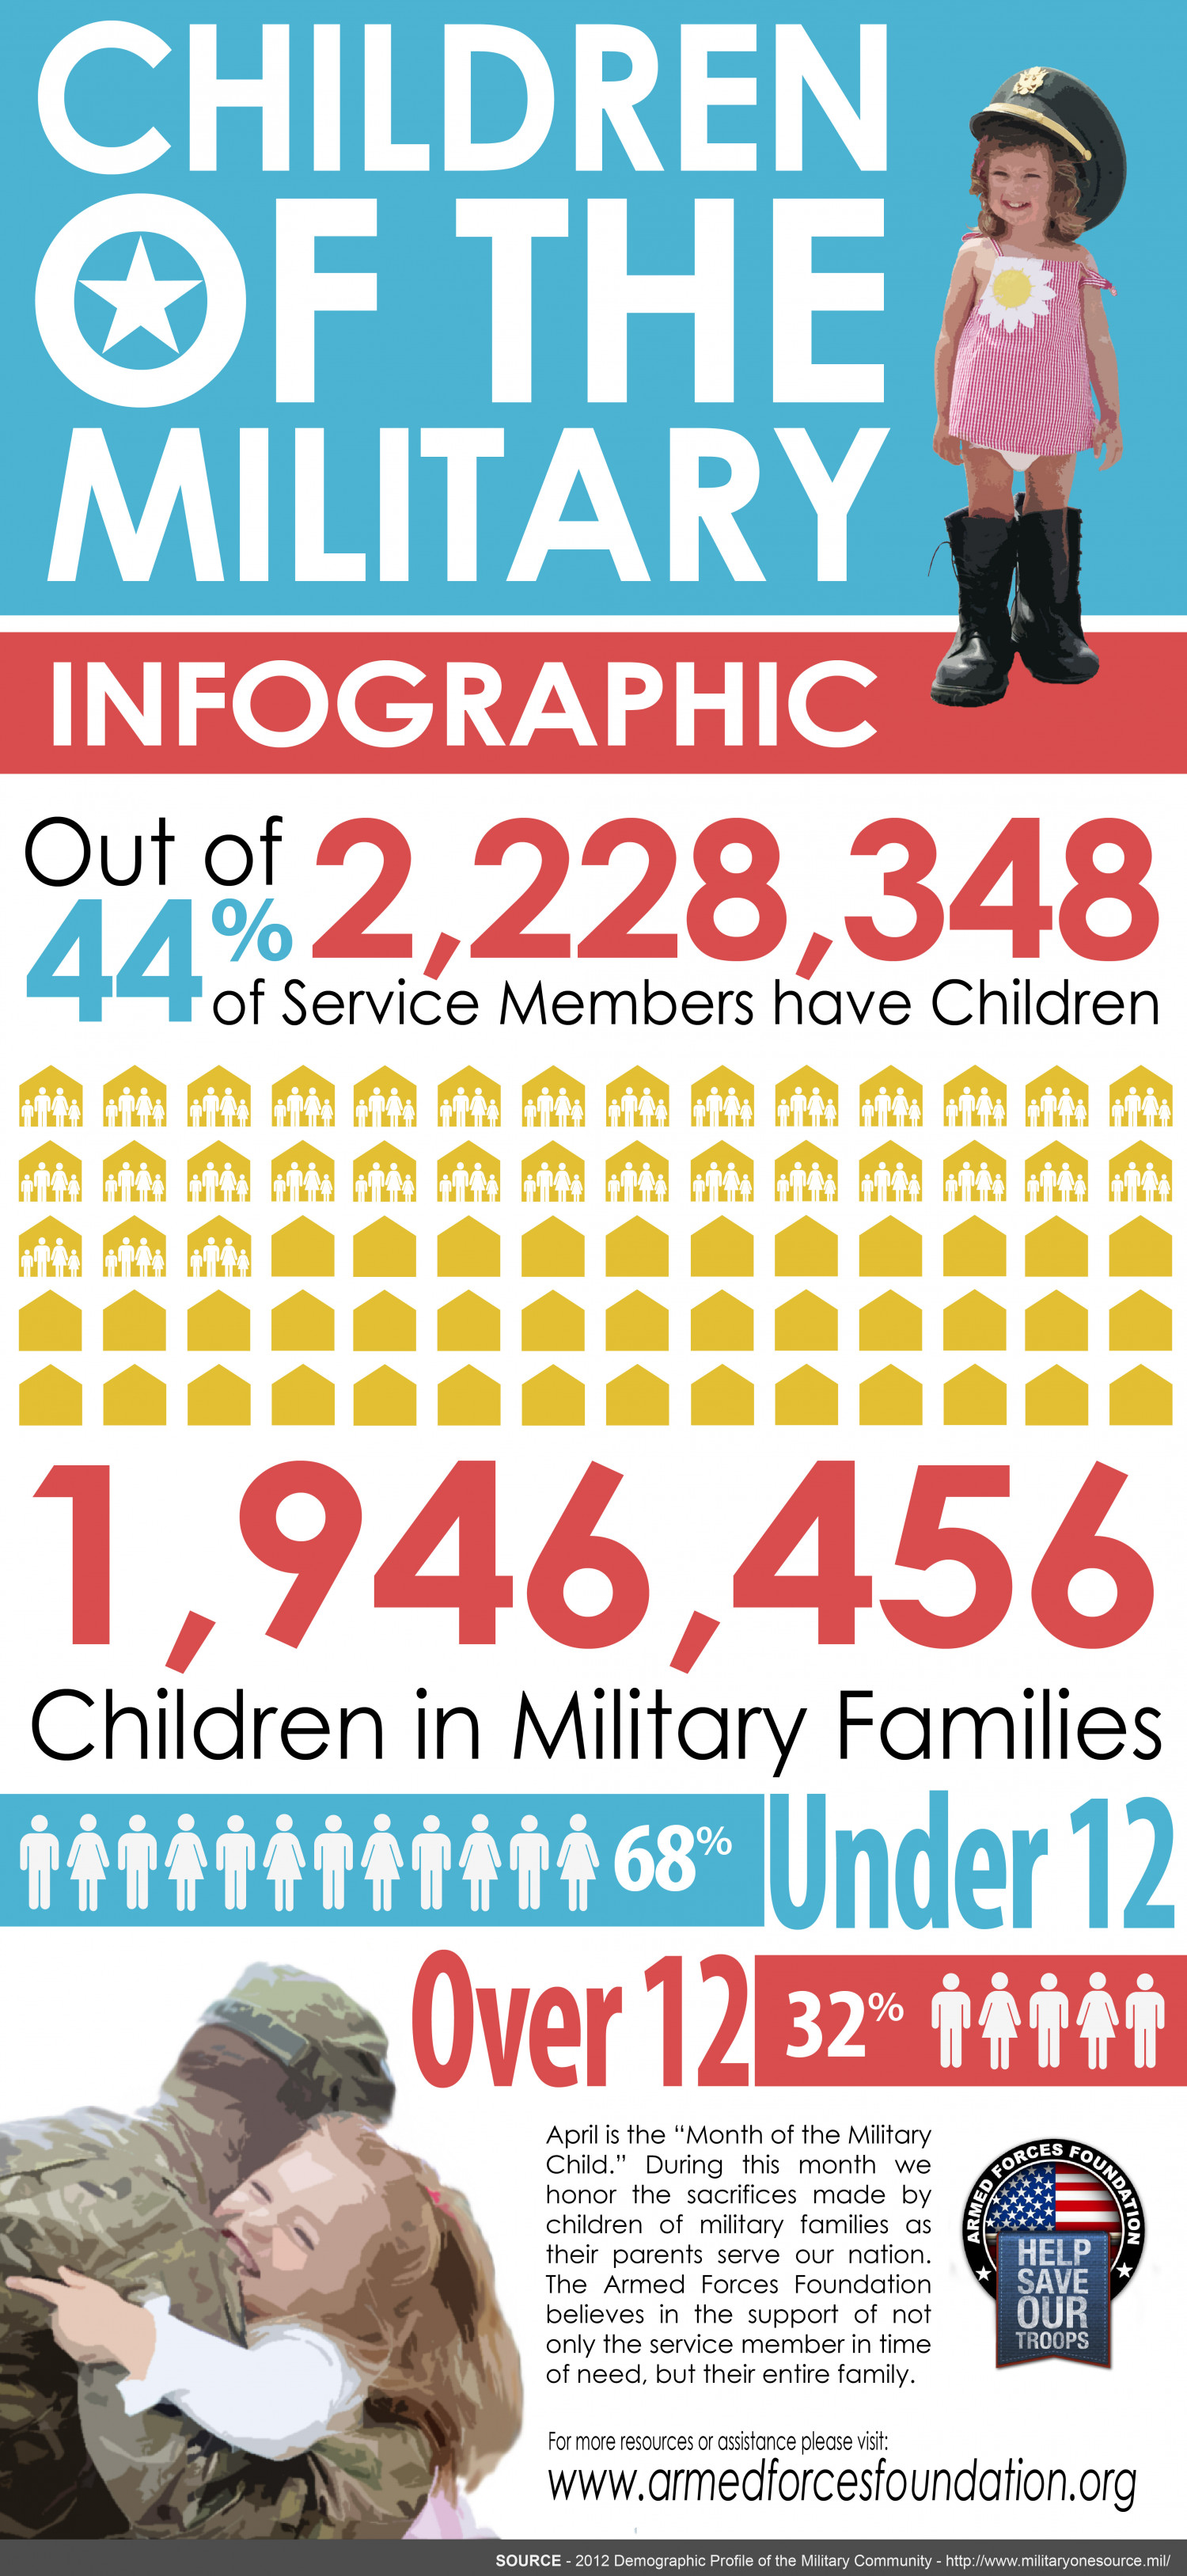 Children of the Military Infographic